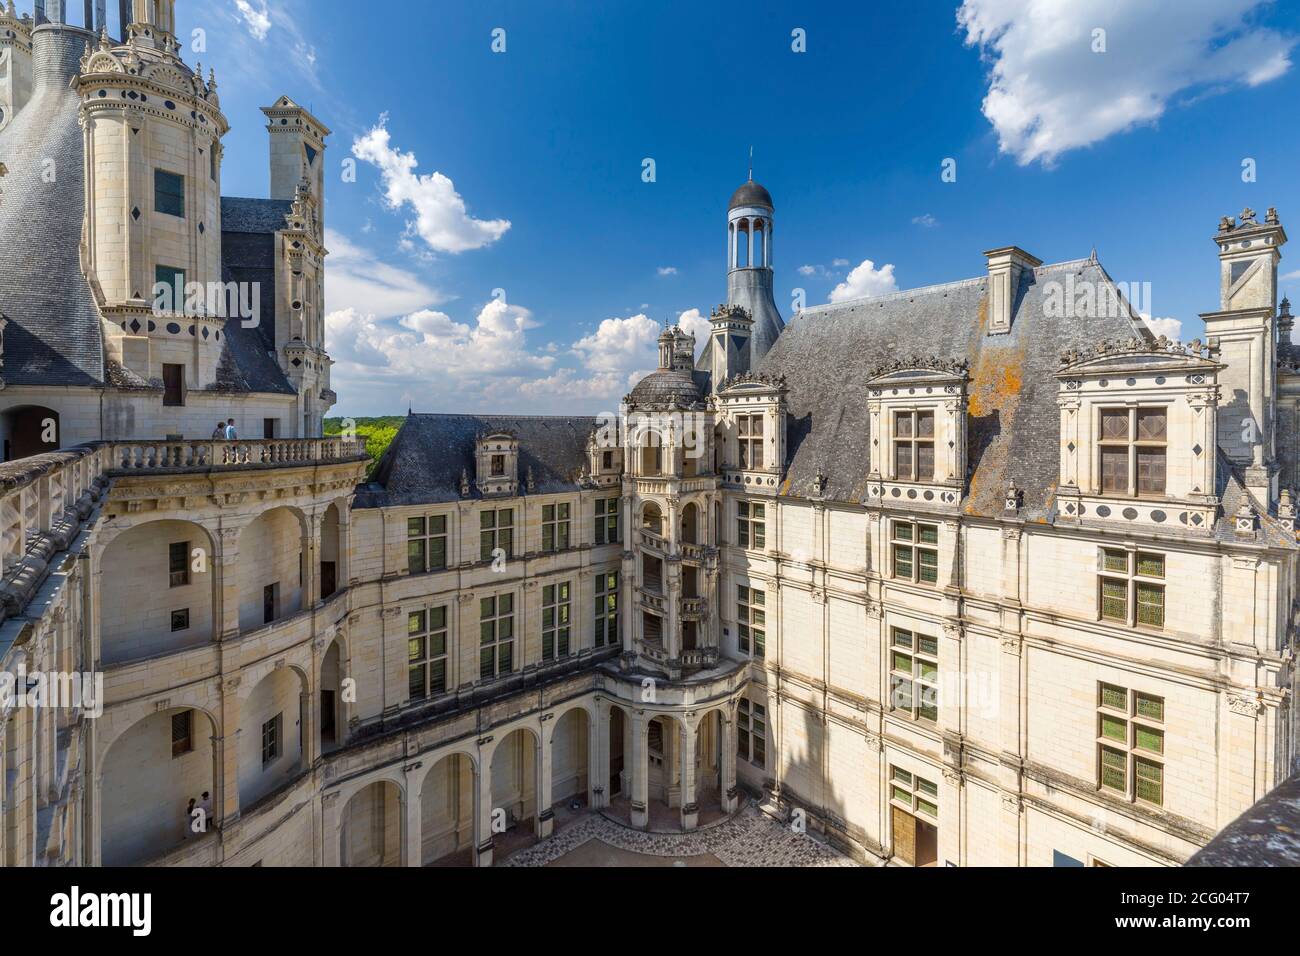 France, Loir et Cher, Loire valley listed as World Heritage by UNESCO, Chambord, the castle of Chambord, built between 1519 and 1538, Renaissance styl Stock Photo